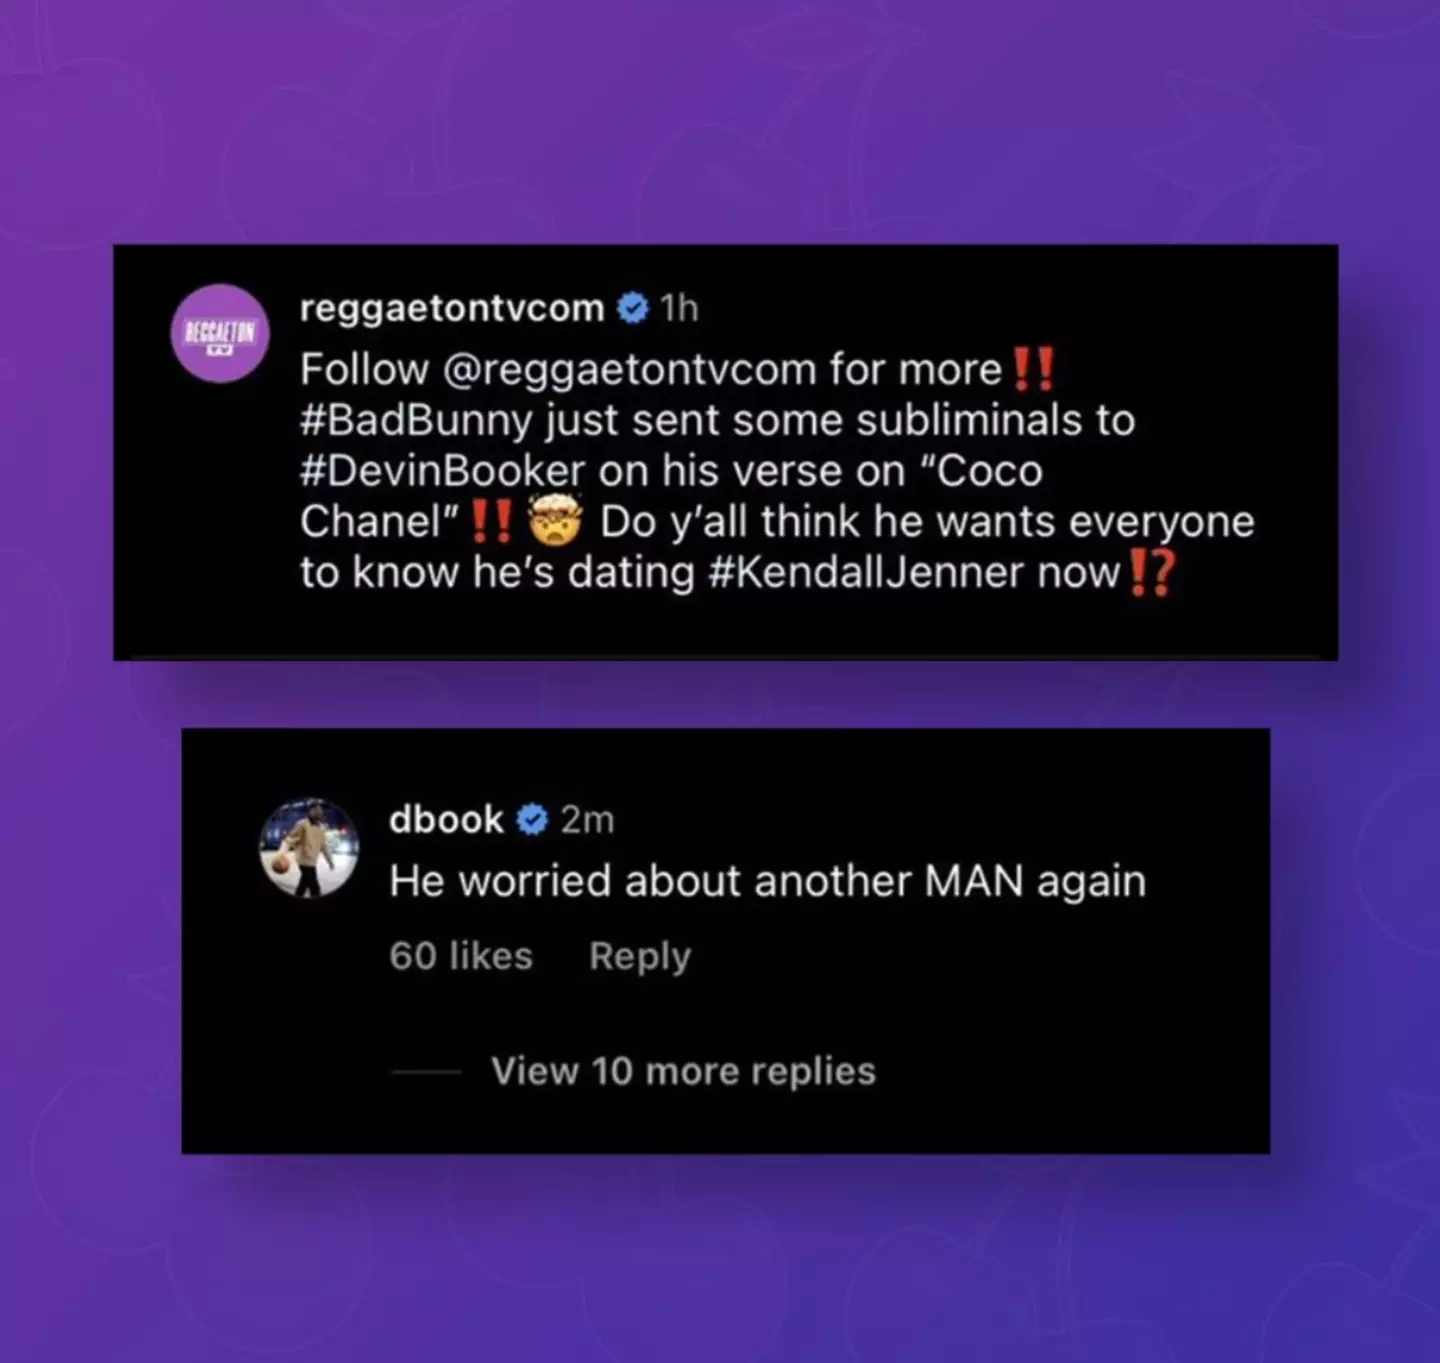 Devin Booker has seemingly responded to being shaded in one of Bad Bunny's songs.